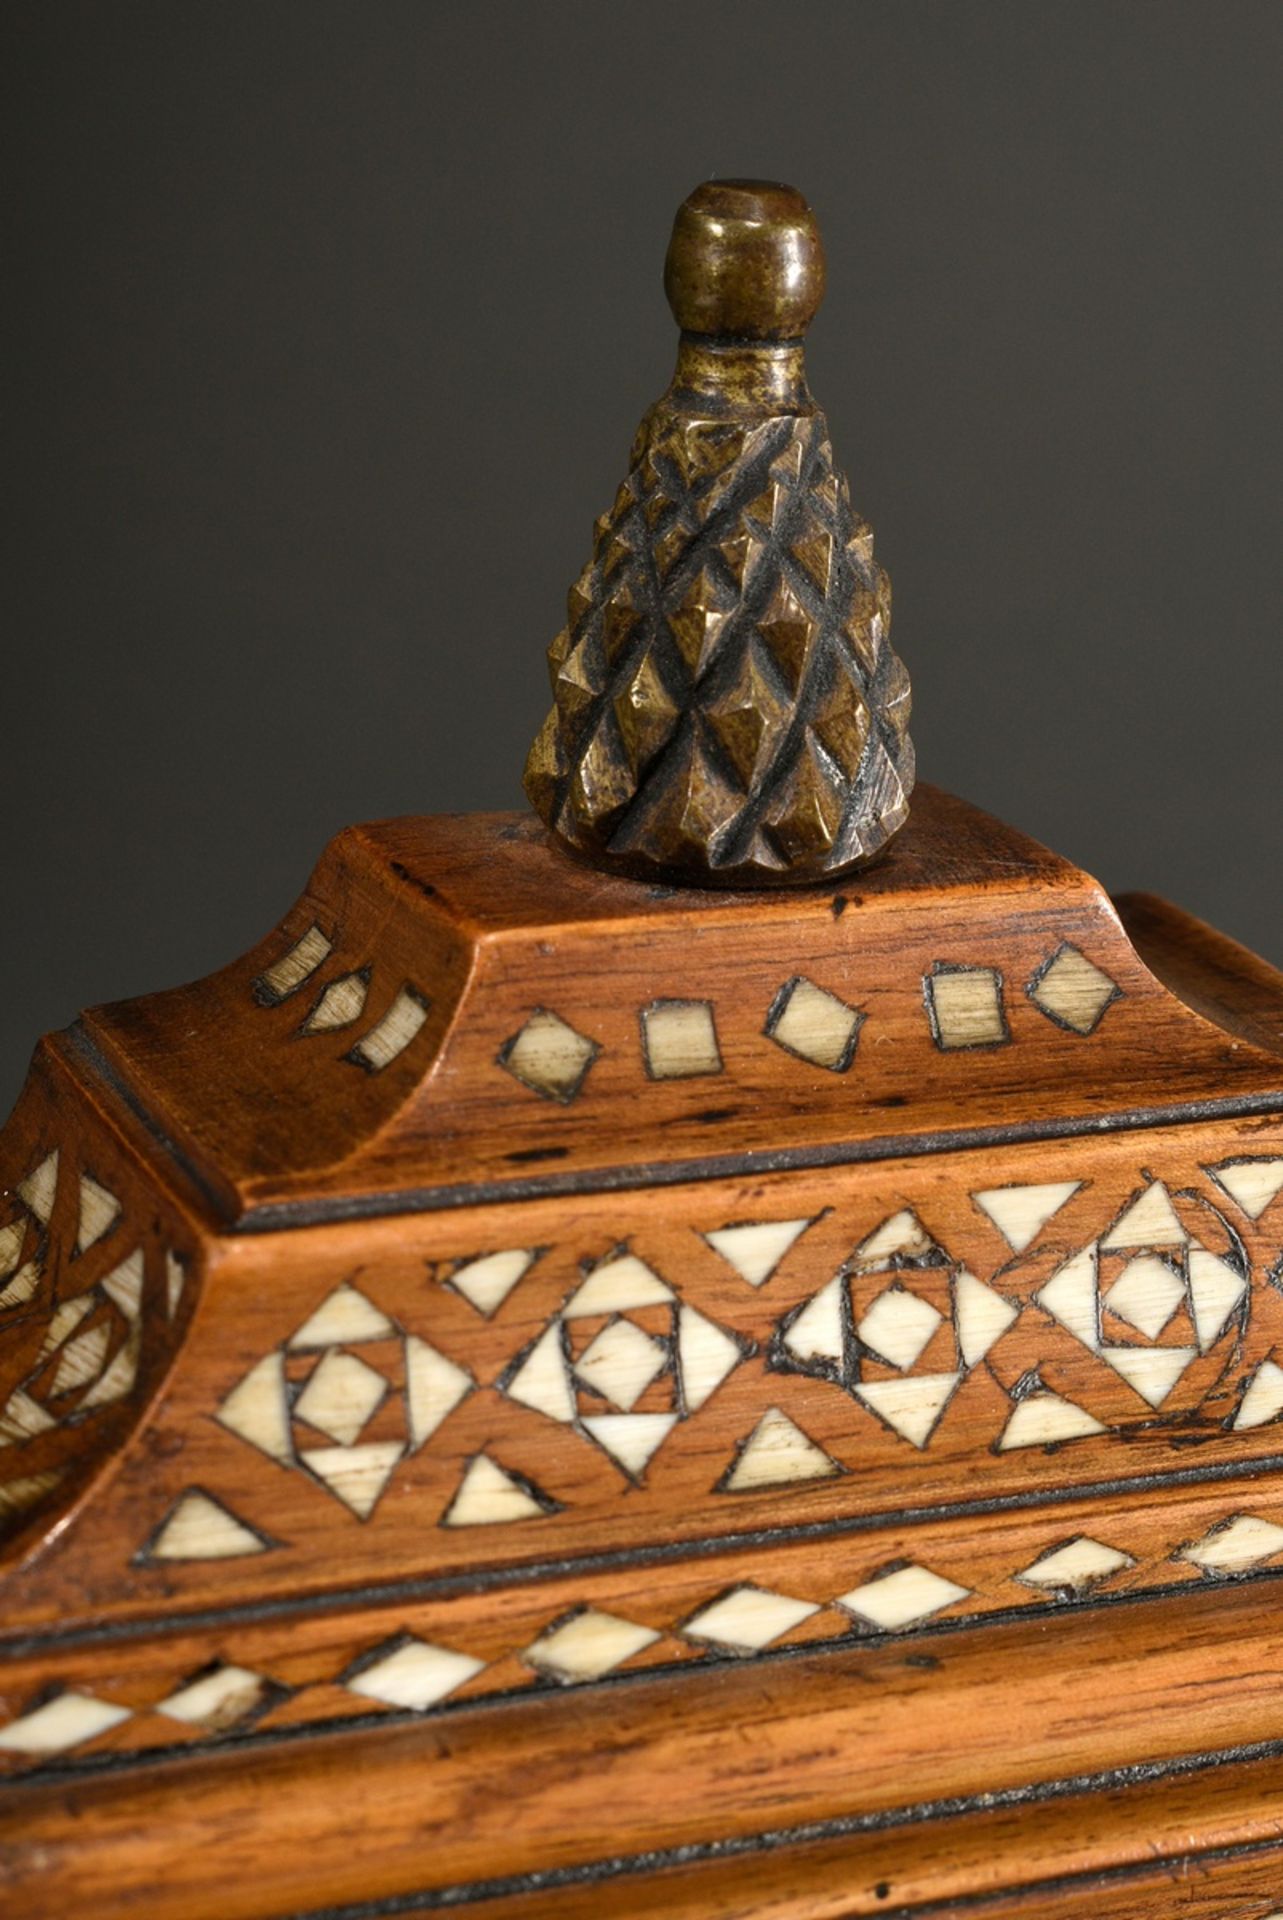 Small Vorderzappler clock in fruitwood case with geometric bone inlays and pineapple crown, florall - Image 4 of 9